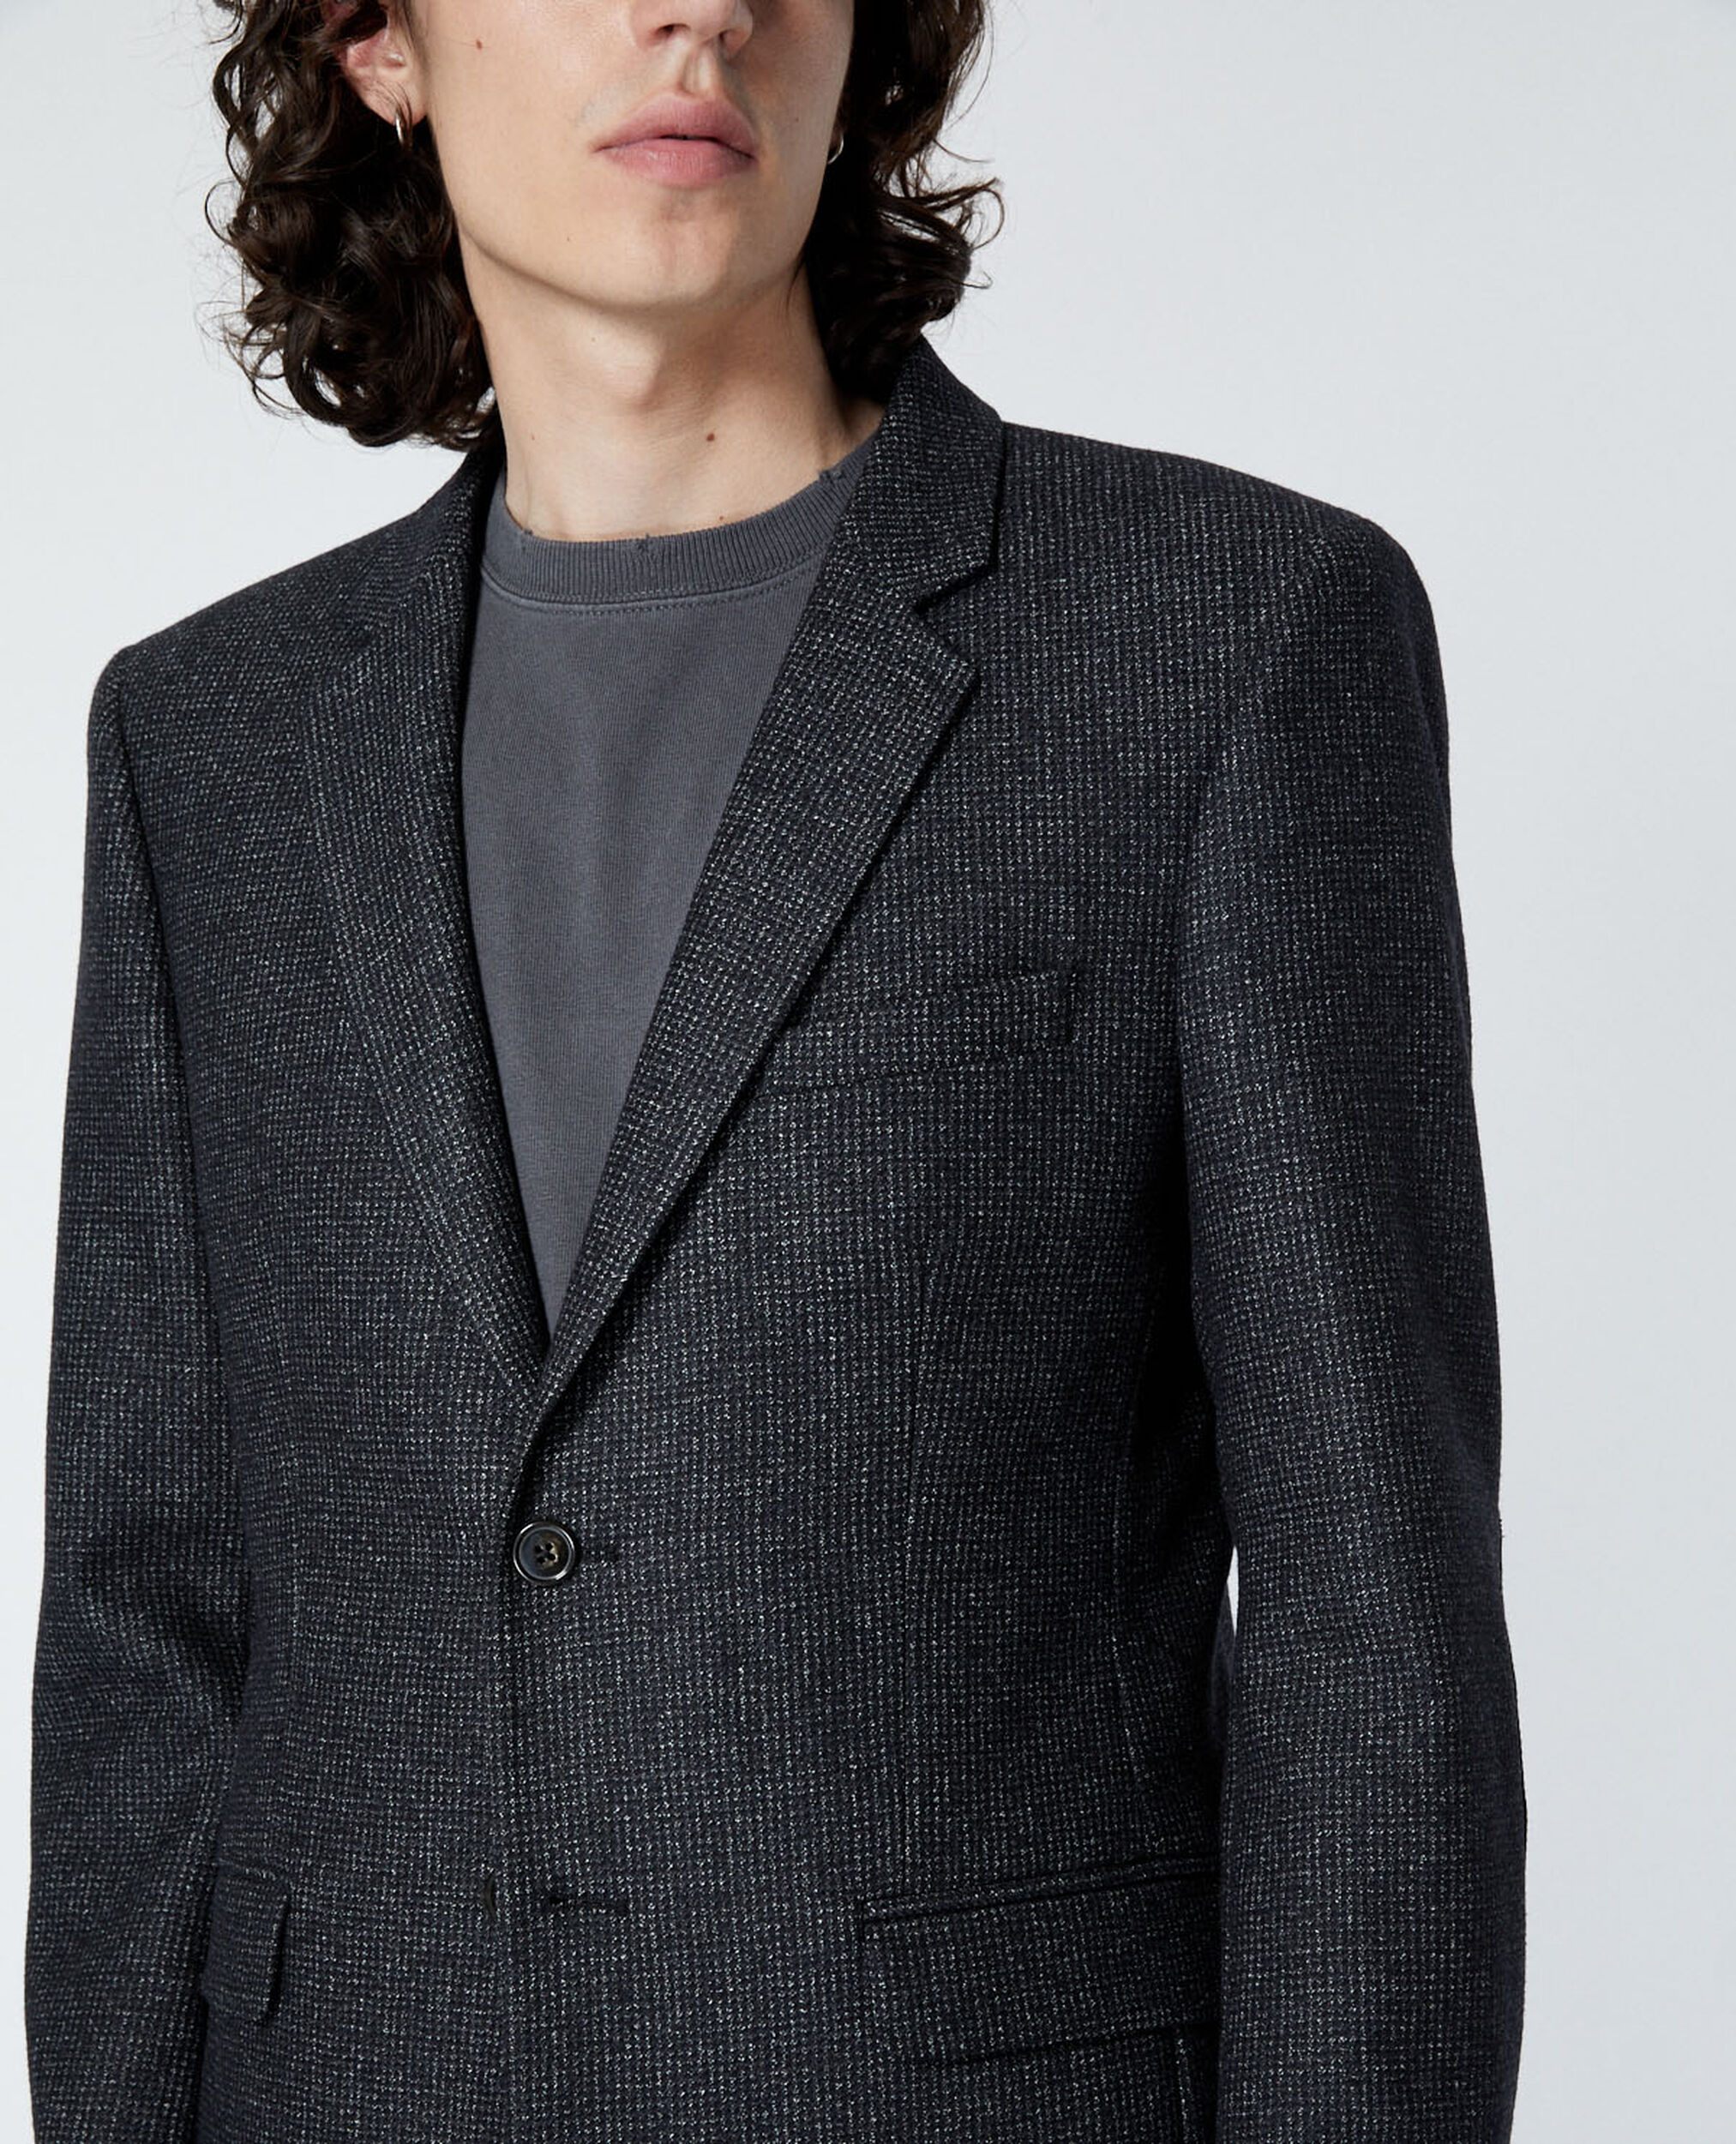 Formal black jacket in wool w/elbow patches, BLACK GREY, hi-res image number null